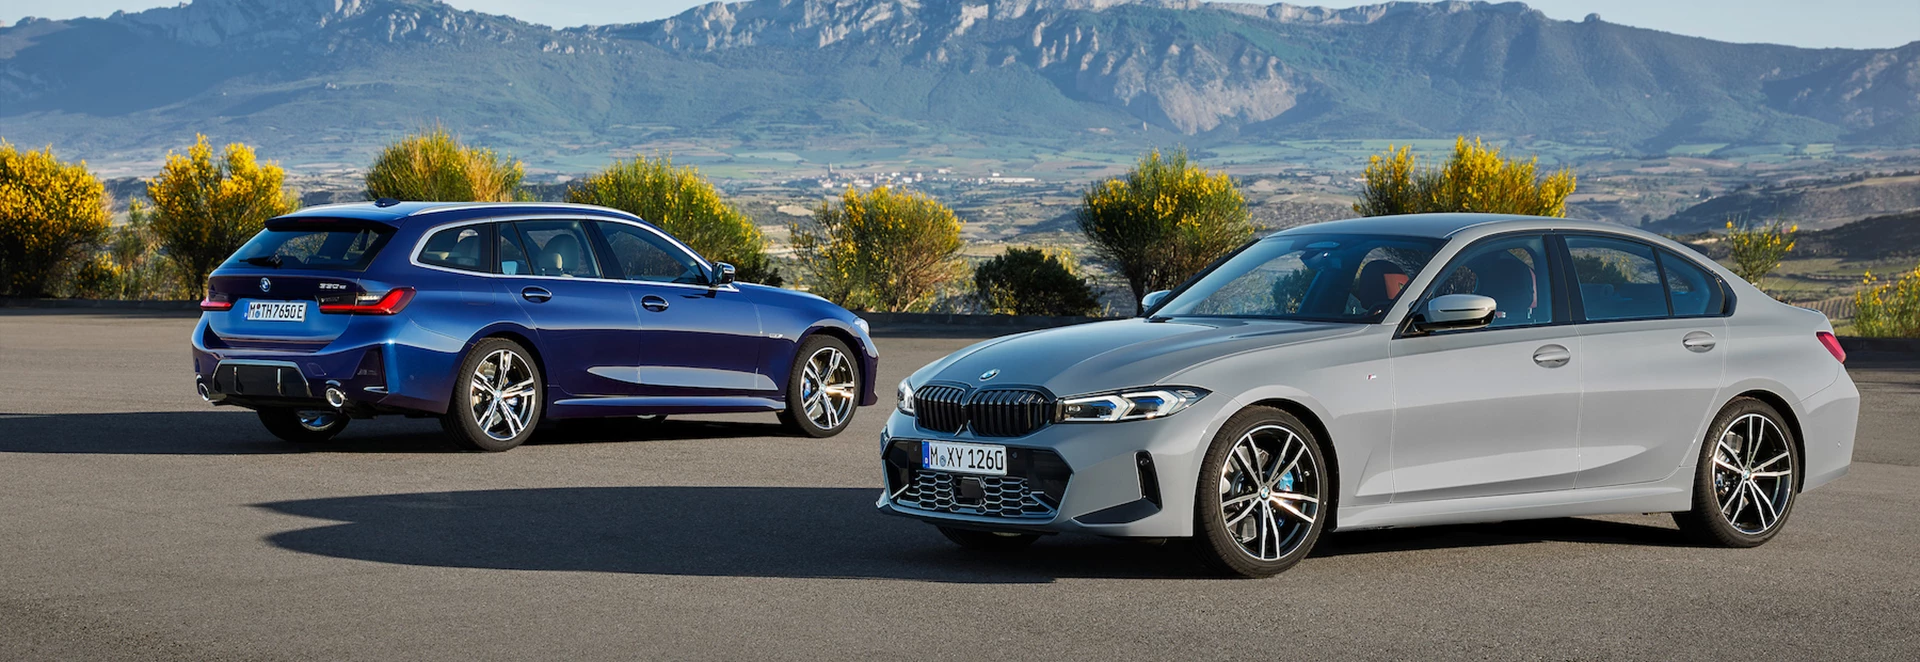 Here’s what you need to know about the new BMW 3 Series 